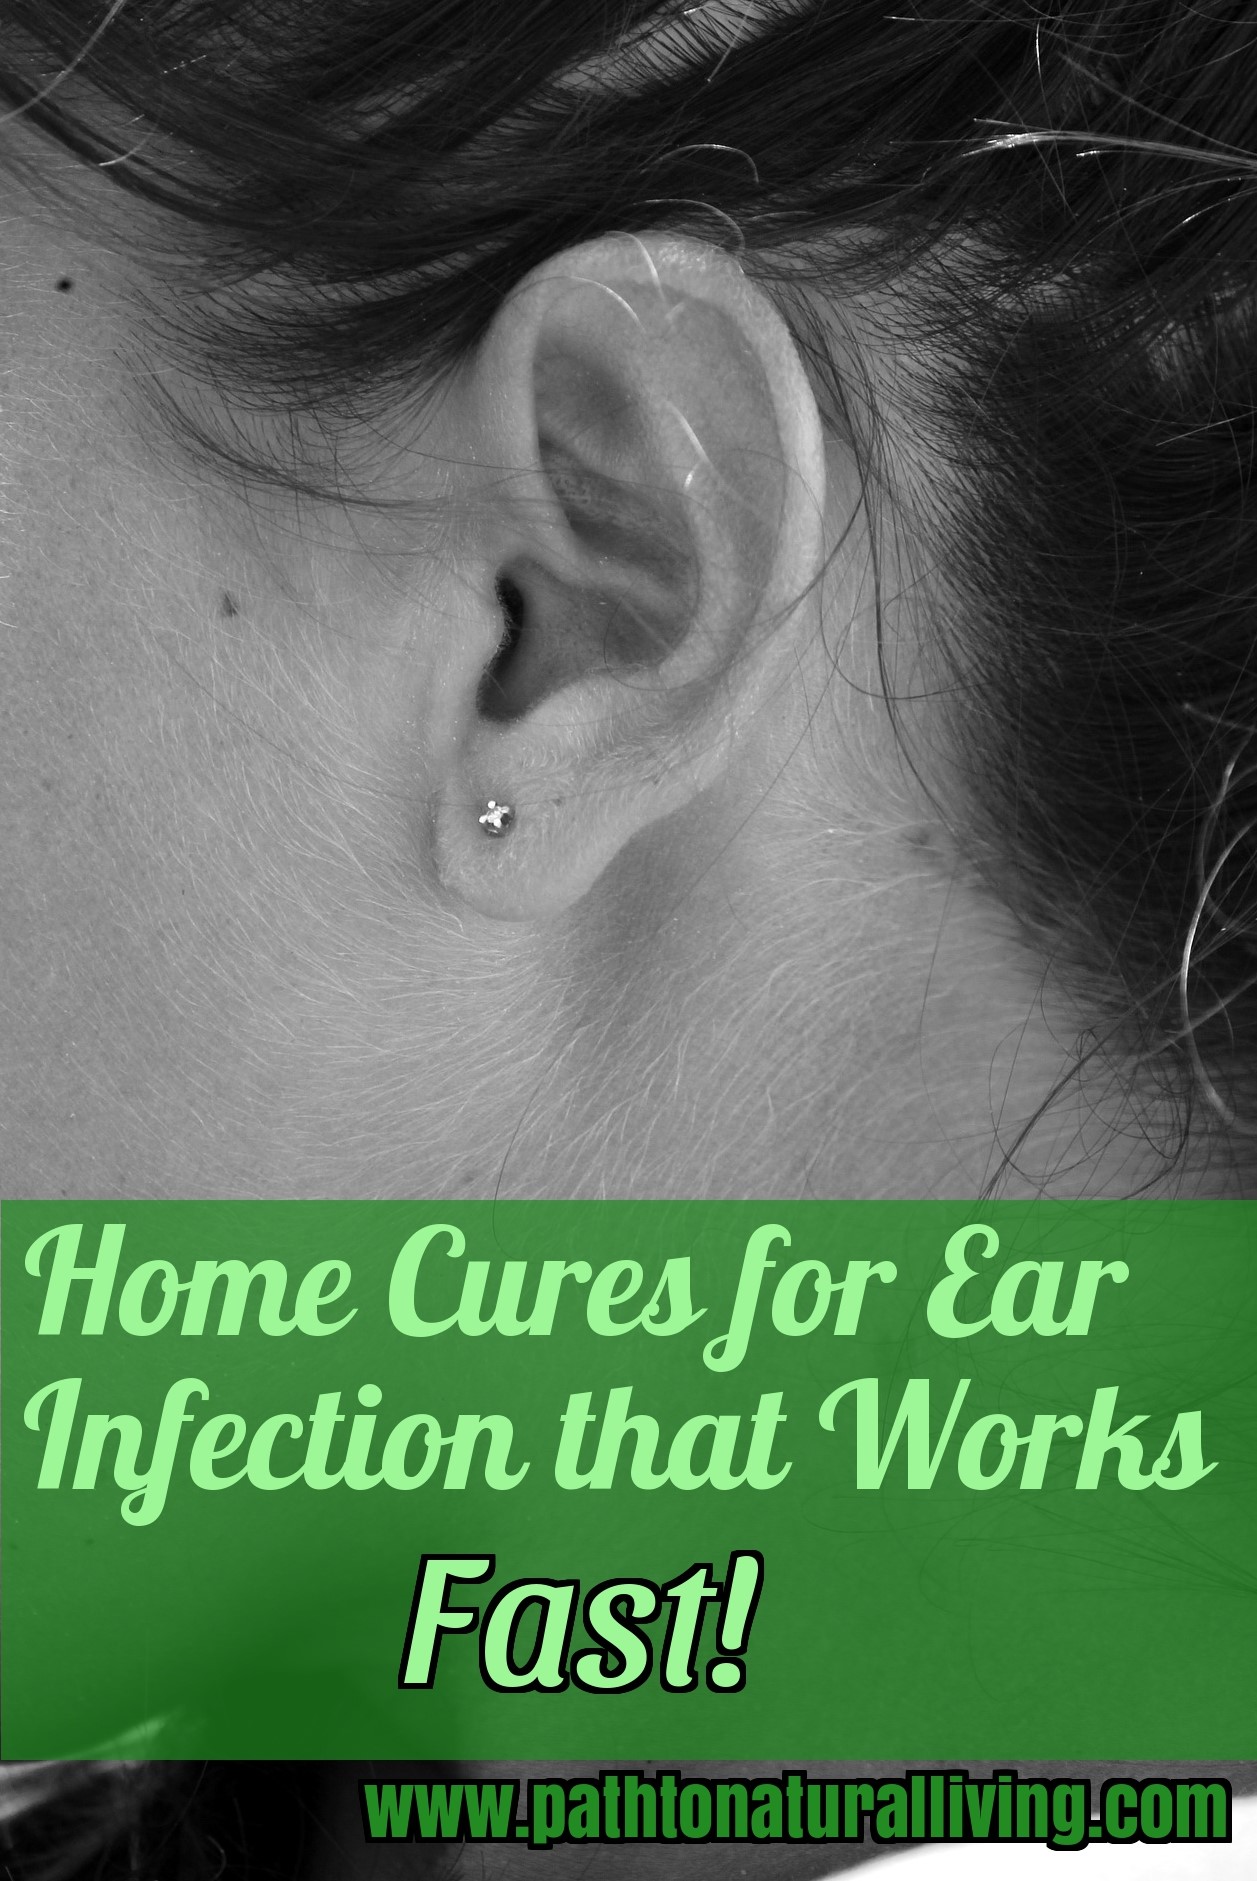 Home Cure for An Ear Infection that Works Fast